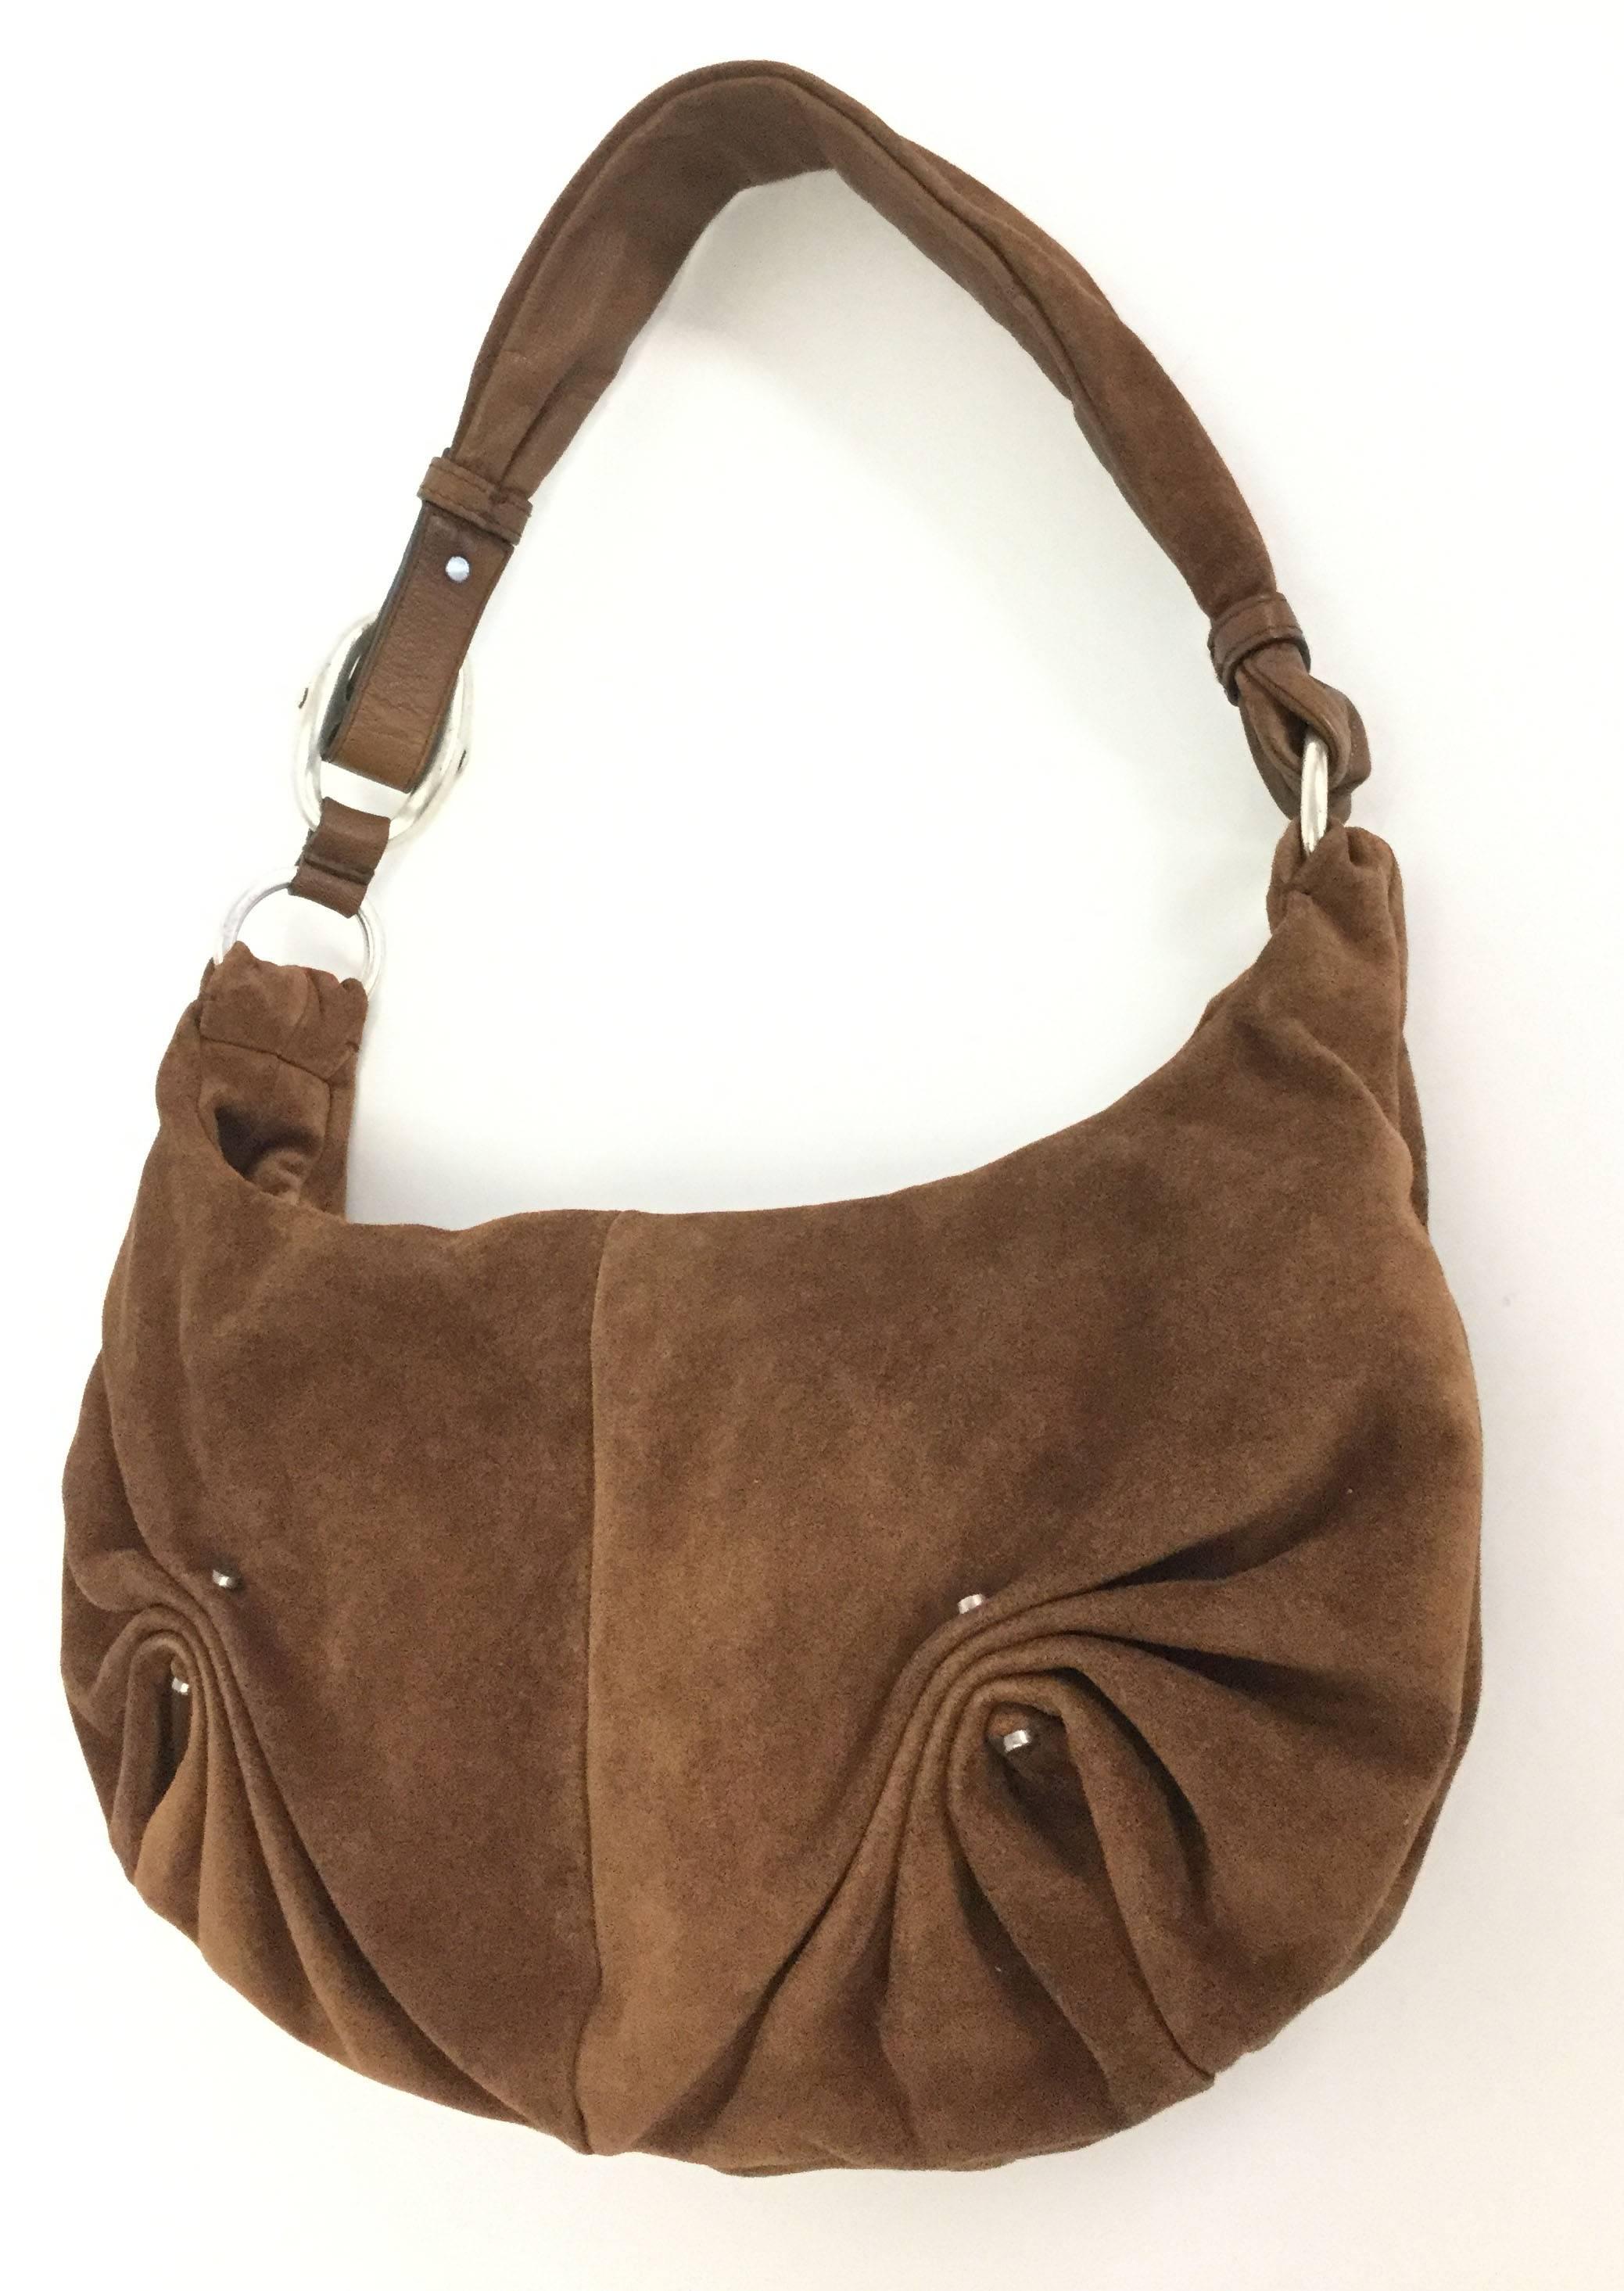 This gorgeous cocoa brown split leather suede hobo shoulder bag by Yves Saint Laurent is both sculptural and wonderfully relaxed. The smooth lambskin full grain aniline body of the purse features soft pinched pleats held together by antiqued